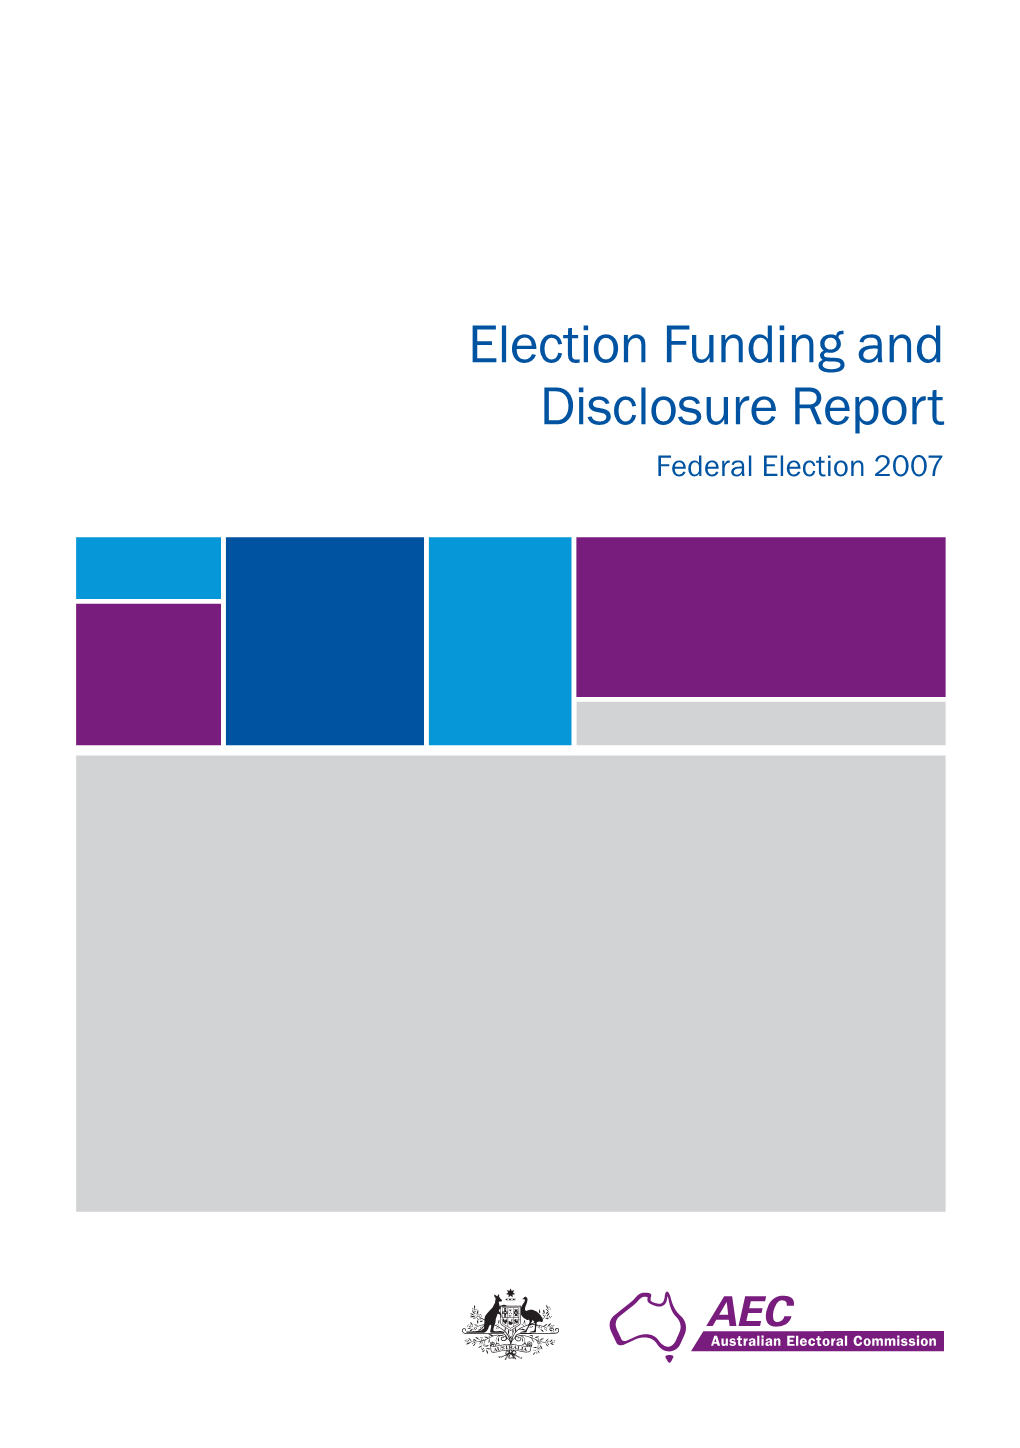 2007 Funding and Disclosure Election Report